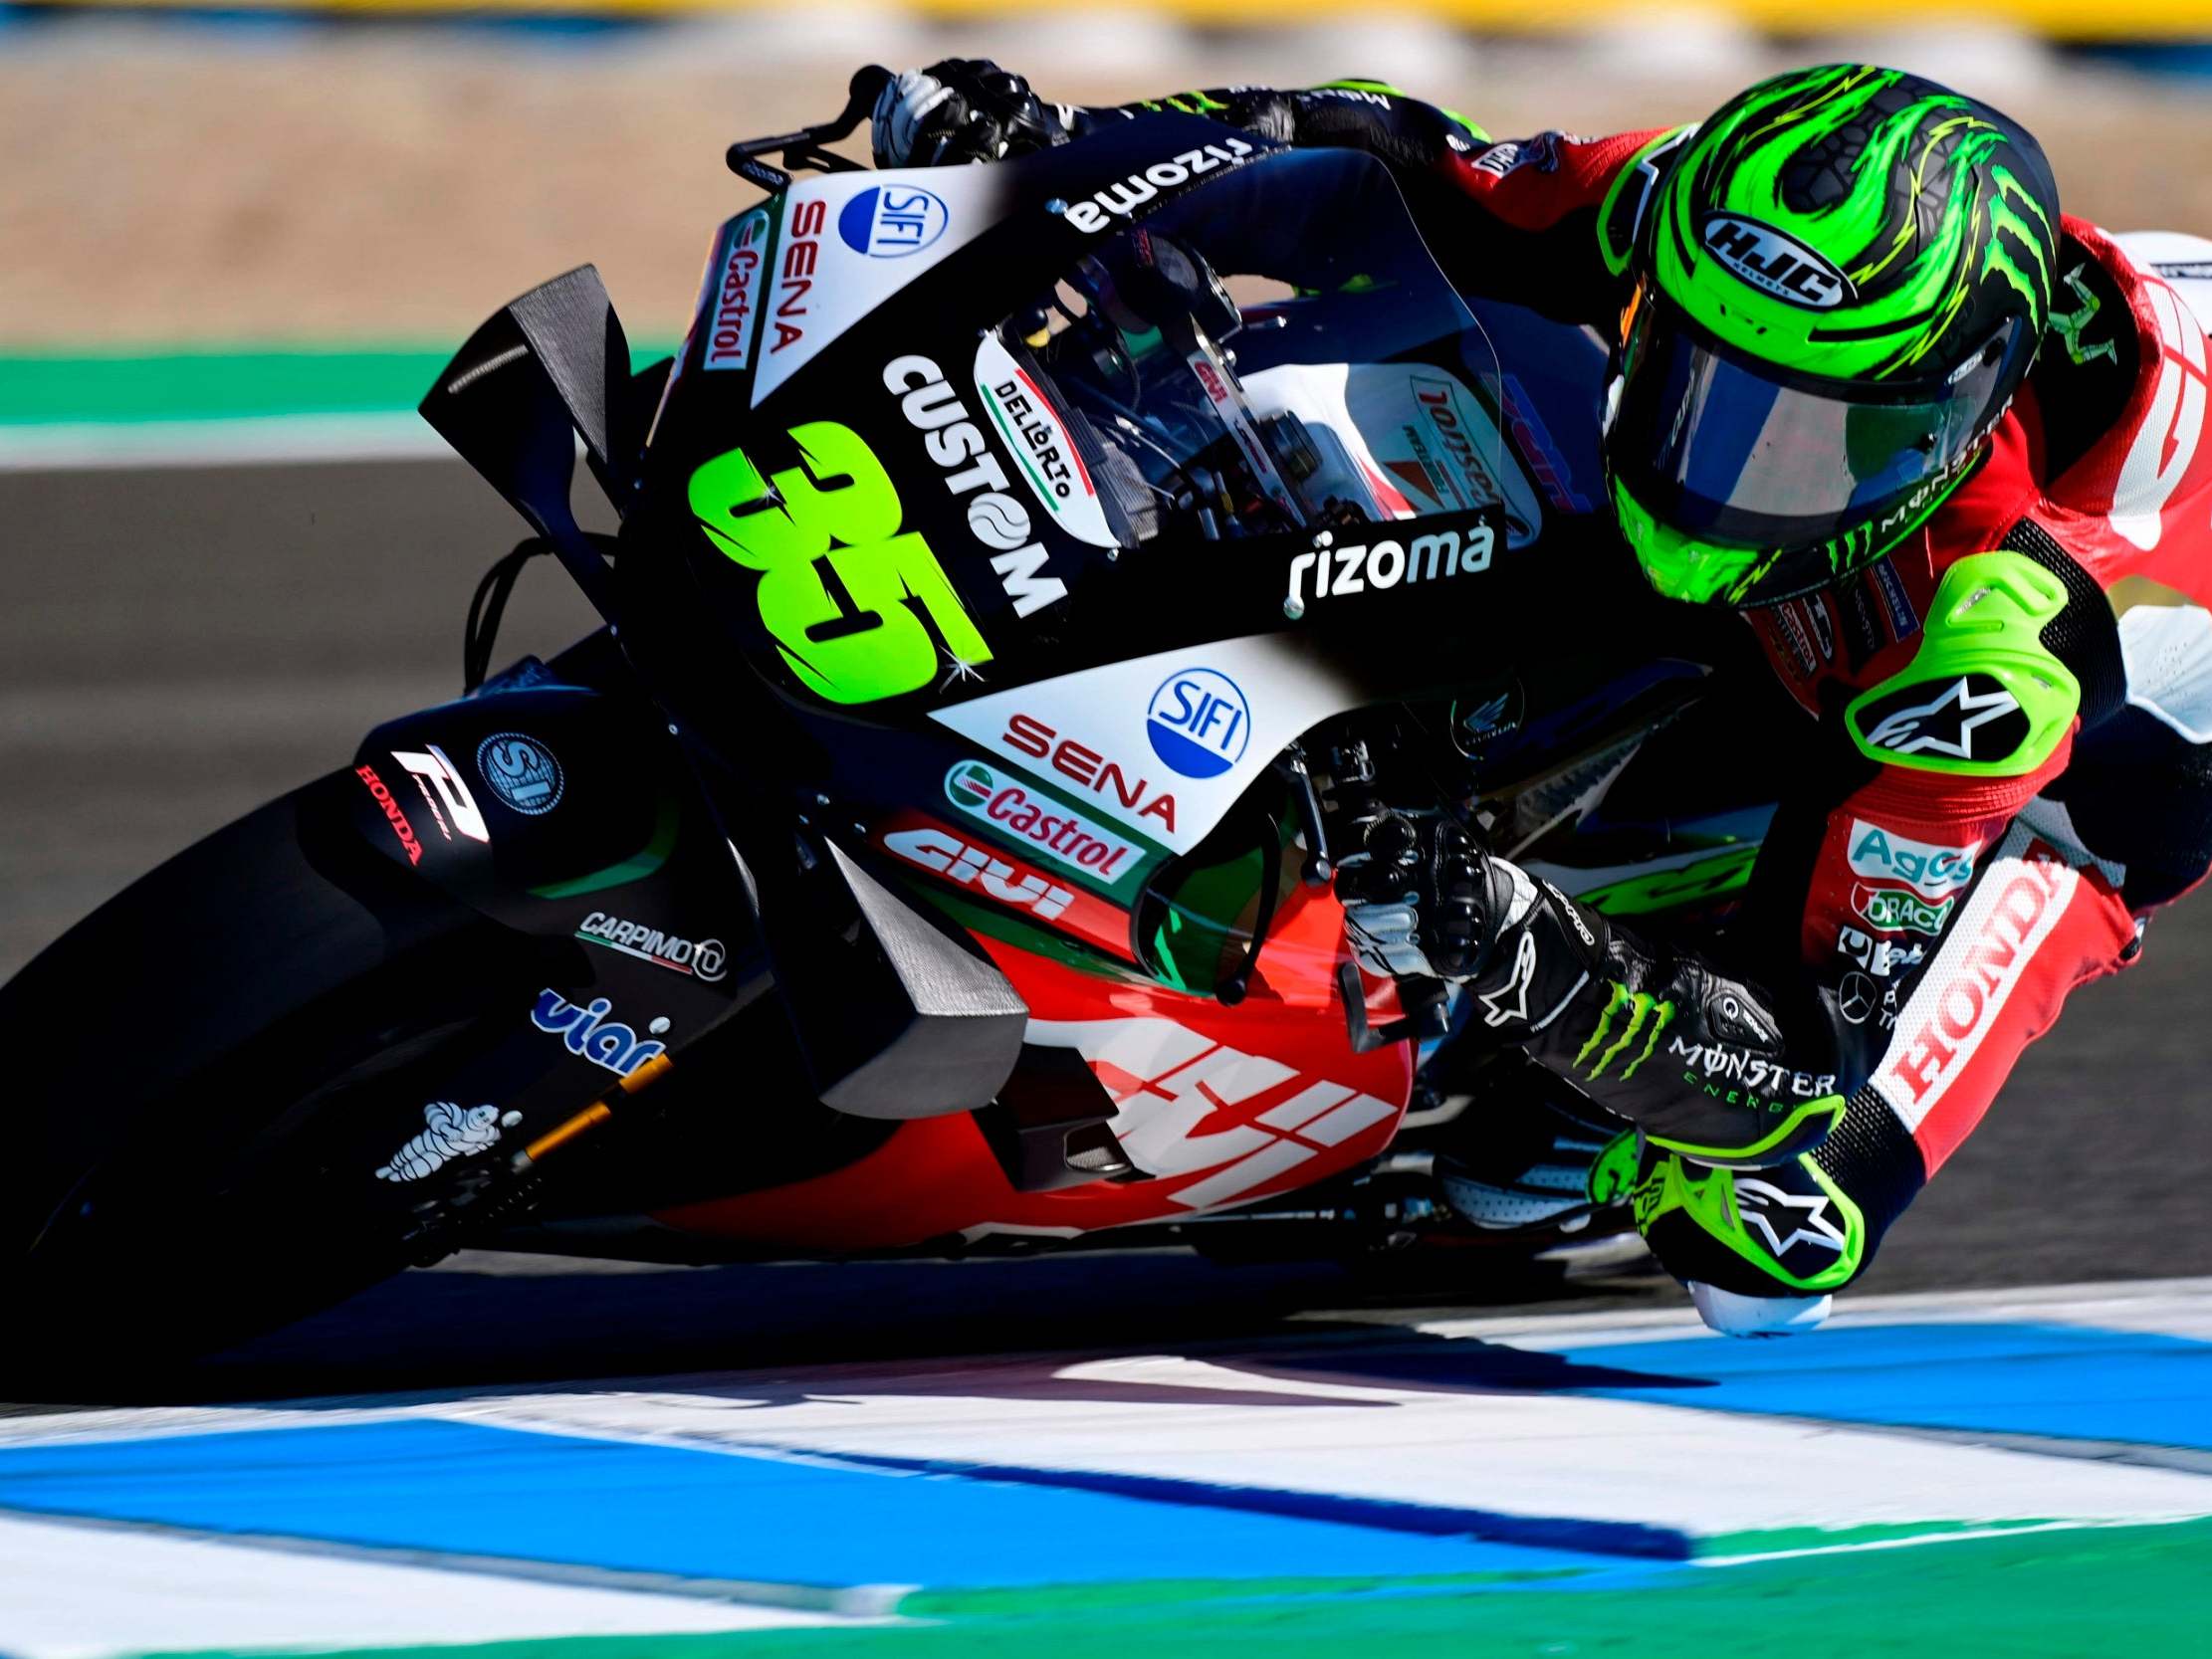 Crutchlow will leave LCR Honda after six years